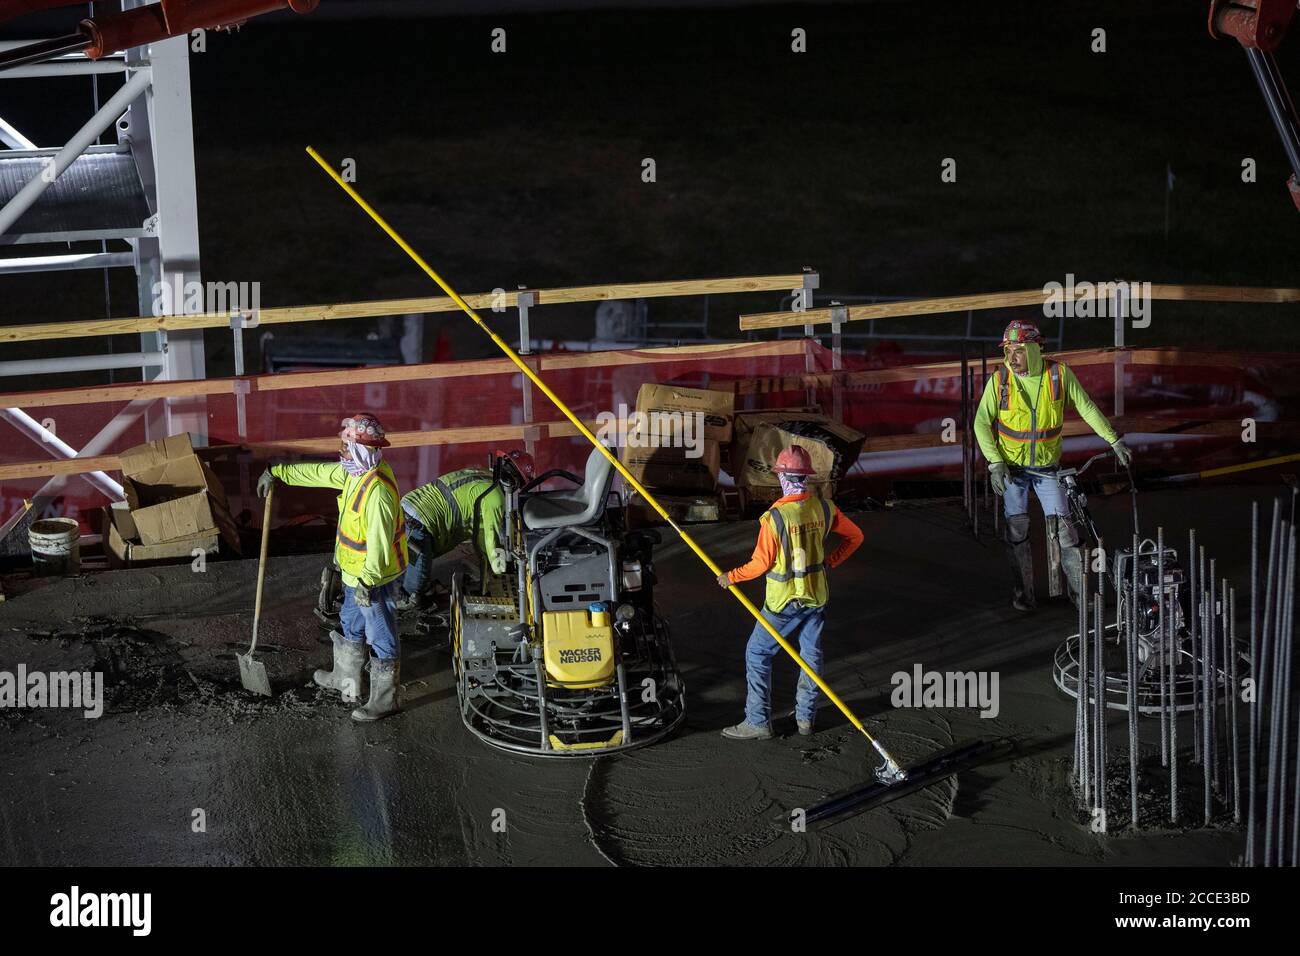 Austin, TX USA July 25, 2020: Concrete crews work on the parking garage of a 53-story building during a night-time pour in the Rainey Street District of downtown Austin, TX. Huge construction projects continue unabated in Texas despite the nationwide COVID-19 pandemic and the state stricken with over a half million cases and 10,000-plus deaths. Stock Photo